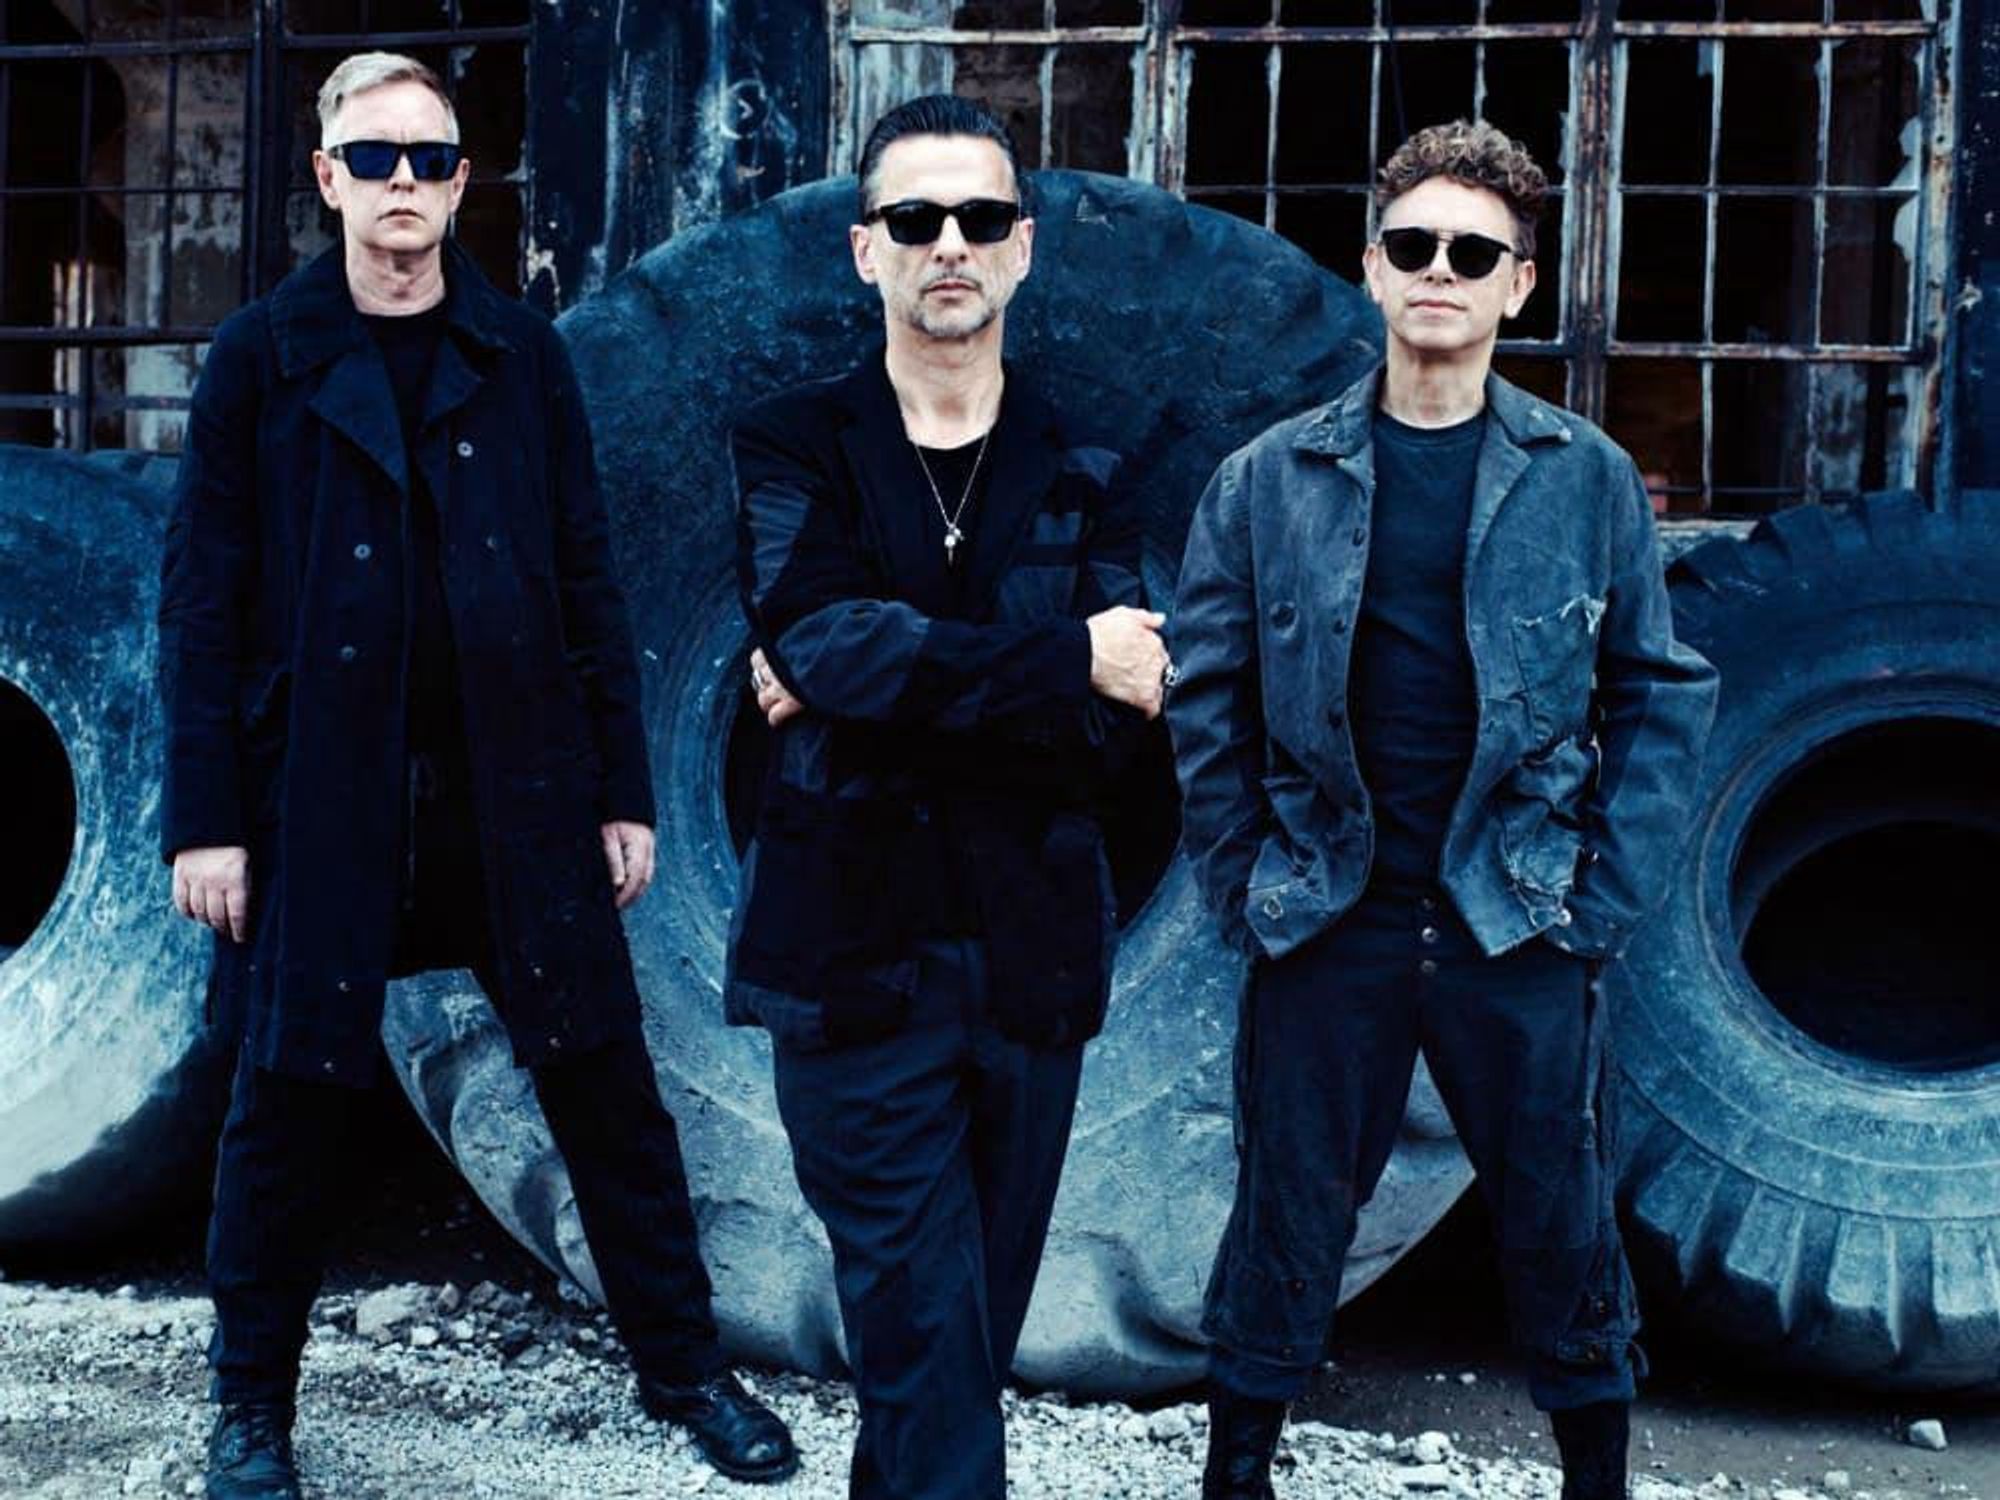 Depeche Mode making stop in Houston as part of 2023 world tour